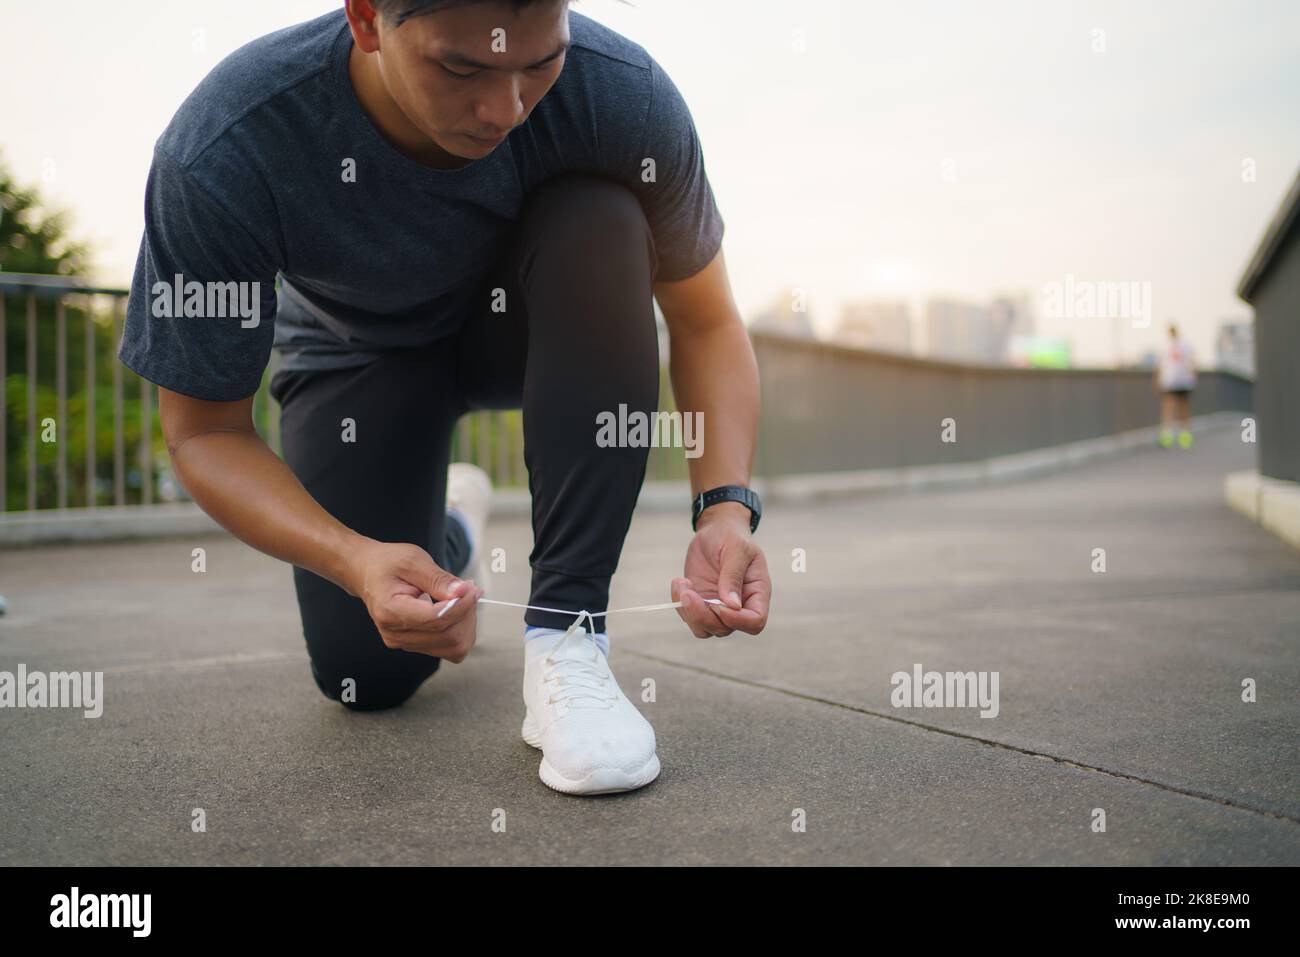 Close-up of Asian man tying shoelaces on white sneakers. Male person squatting on sidewalk. Sunny morning or day. Male going on footpath. Sport and he Stock Photo